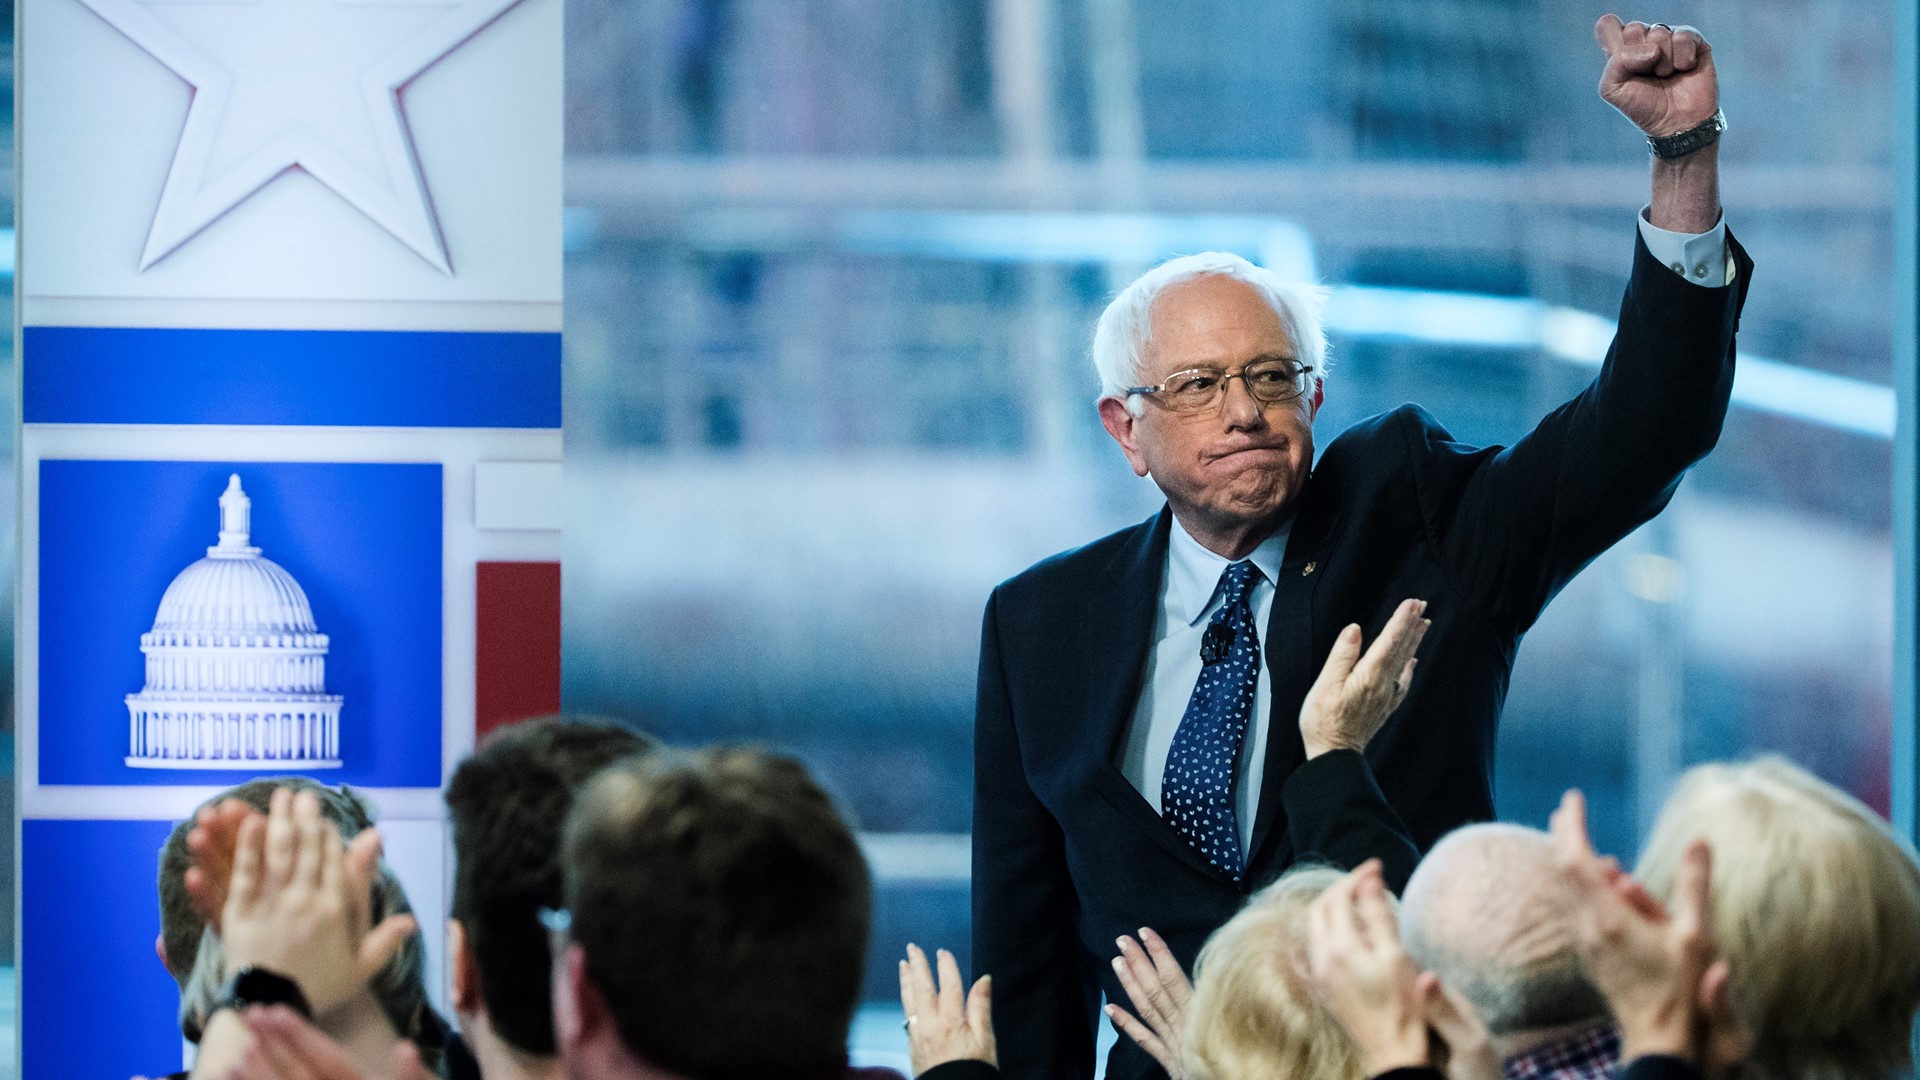 Sen. Bernie Sanders is scheduled to hold a 2020 presidential campaign rally Thursday in downtown Sacramento, his campaign announced.